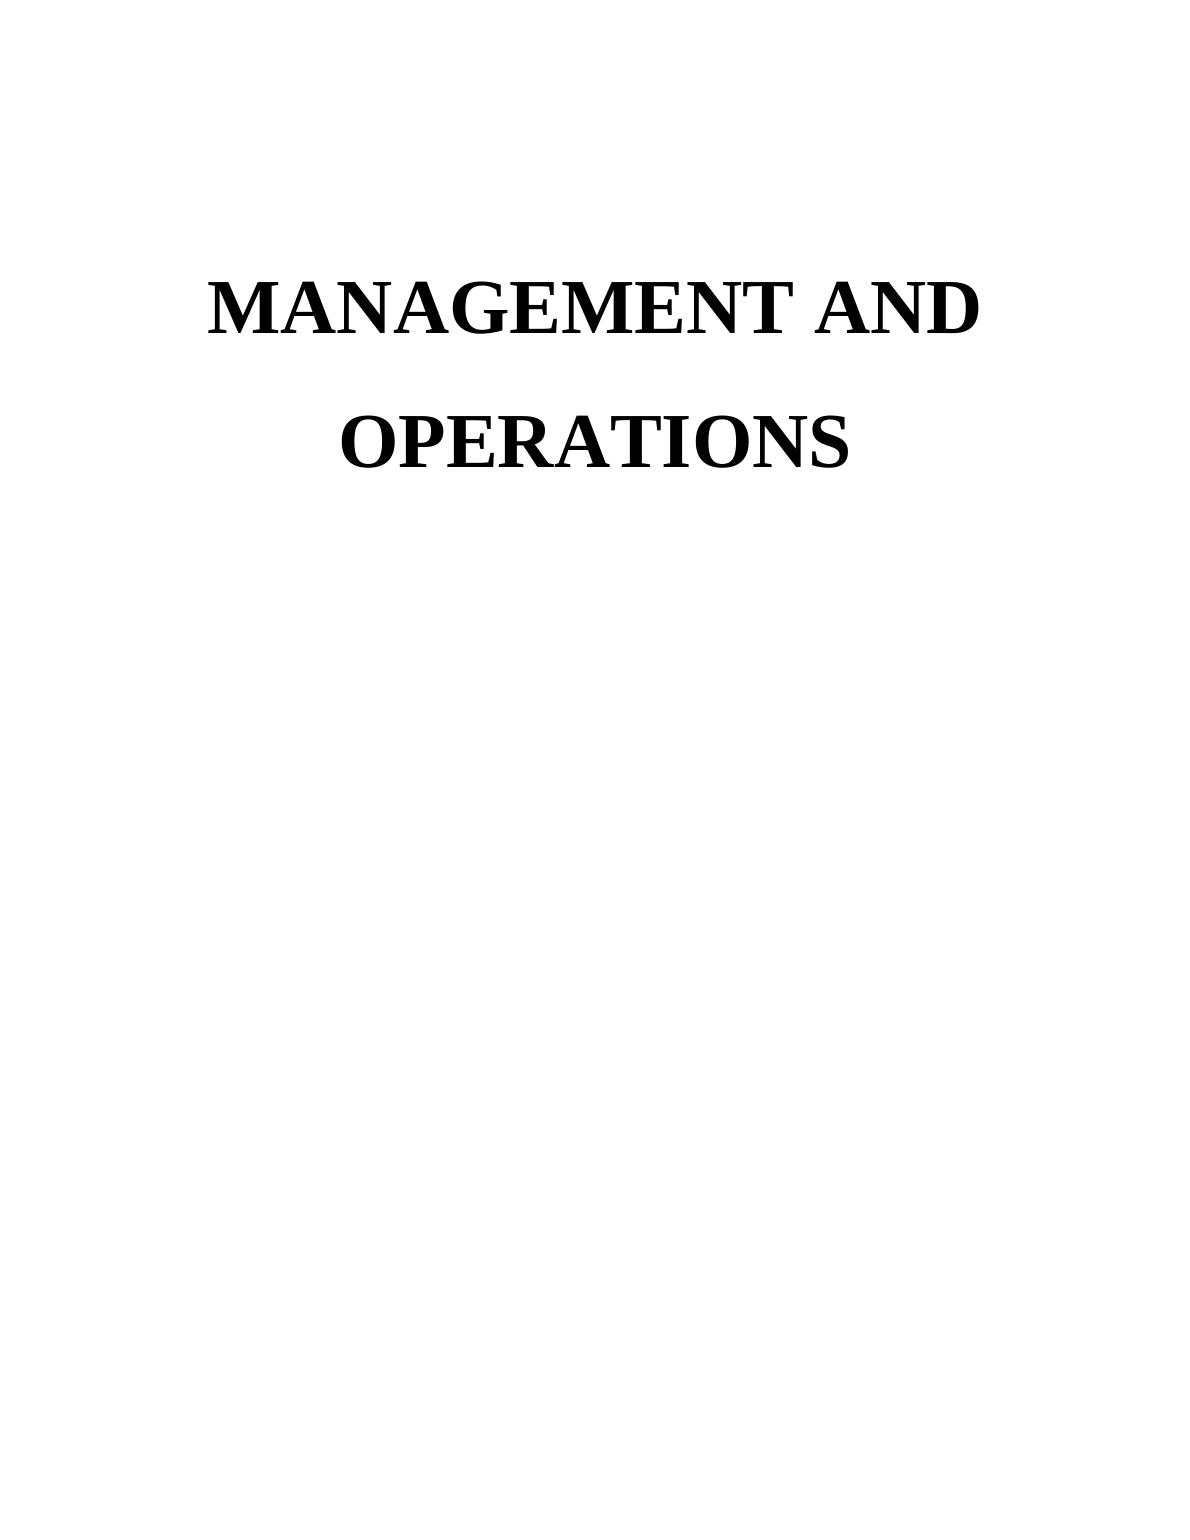 Management and Operations of Toyota - Assignment_1